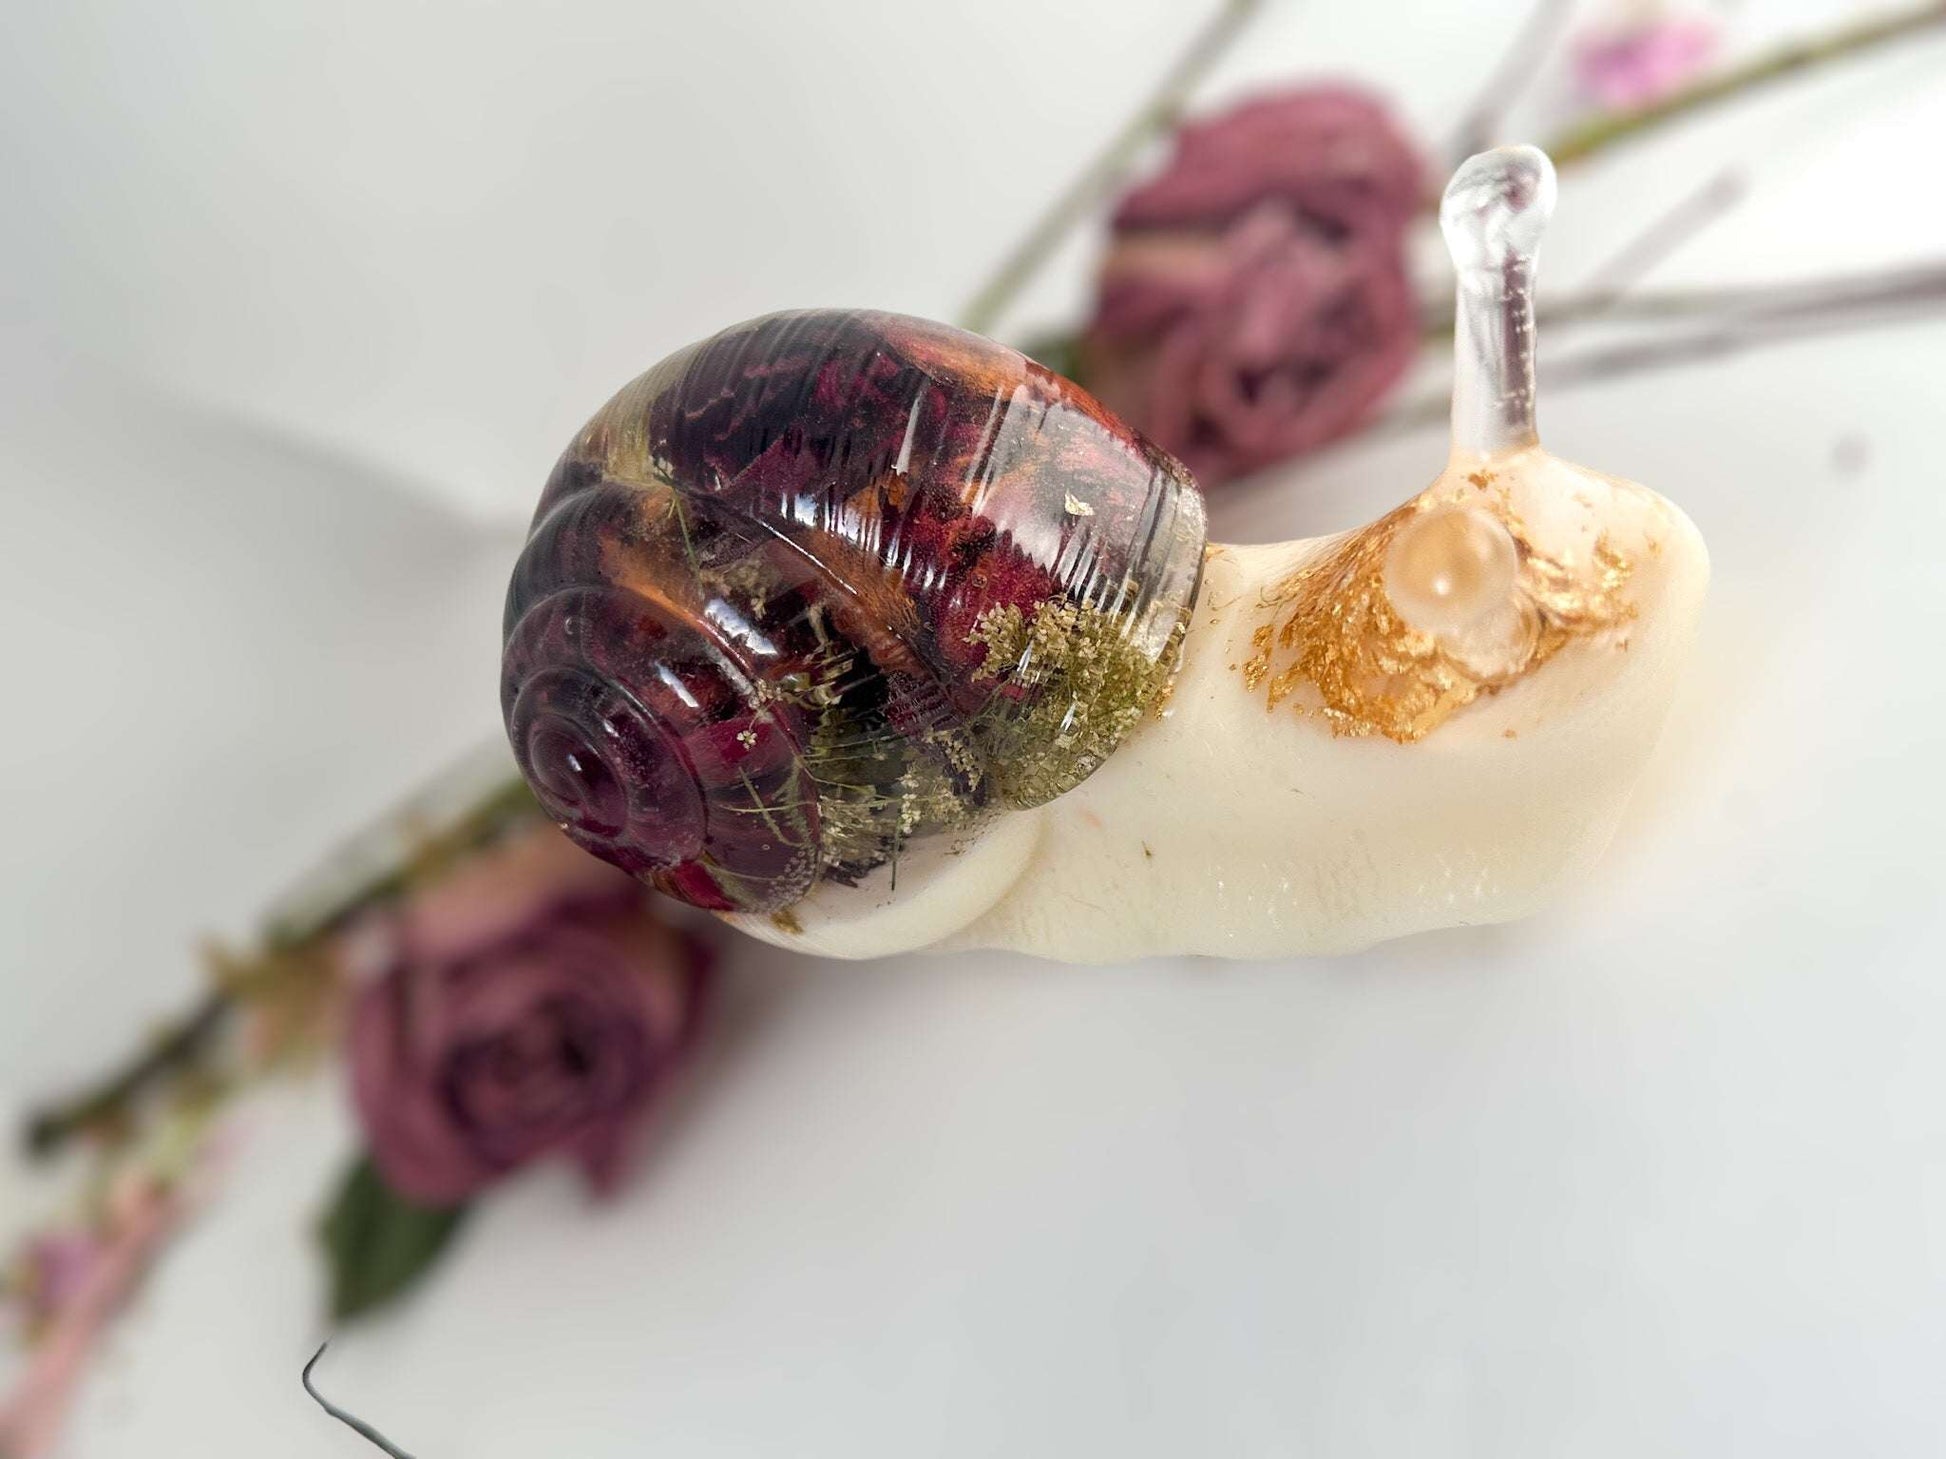 Whimsical Snail Decor with Real Red Roses – Charming Home Accents